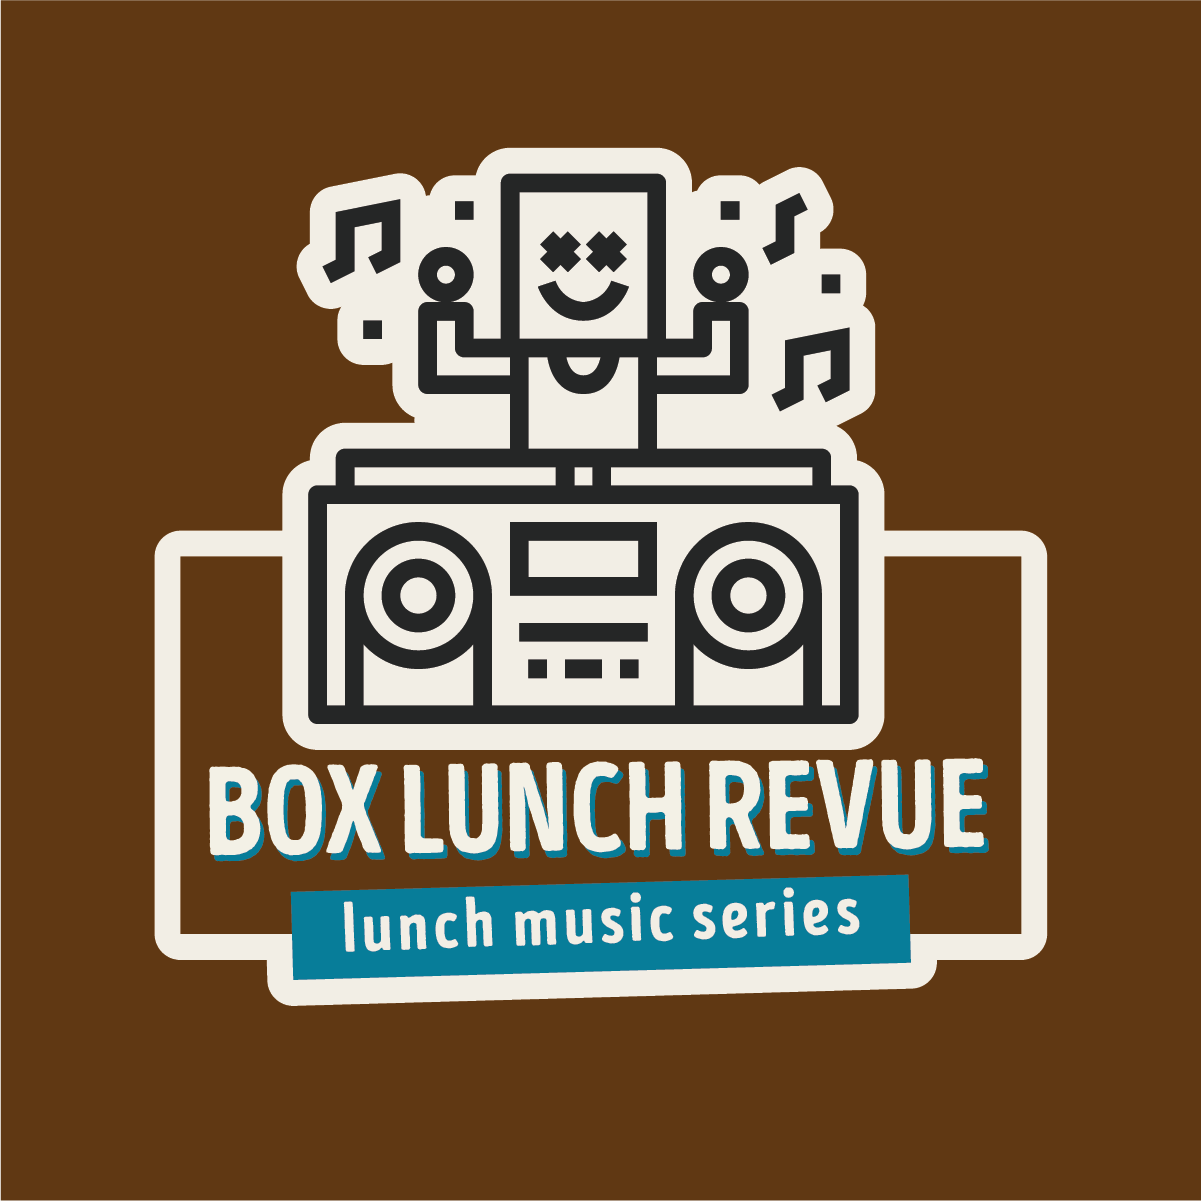 https://www.york365.com/wp-content/uploads/sites/www.york365.com/images/2023/04/event-featured-box-lunch-revue-1682018199.png